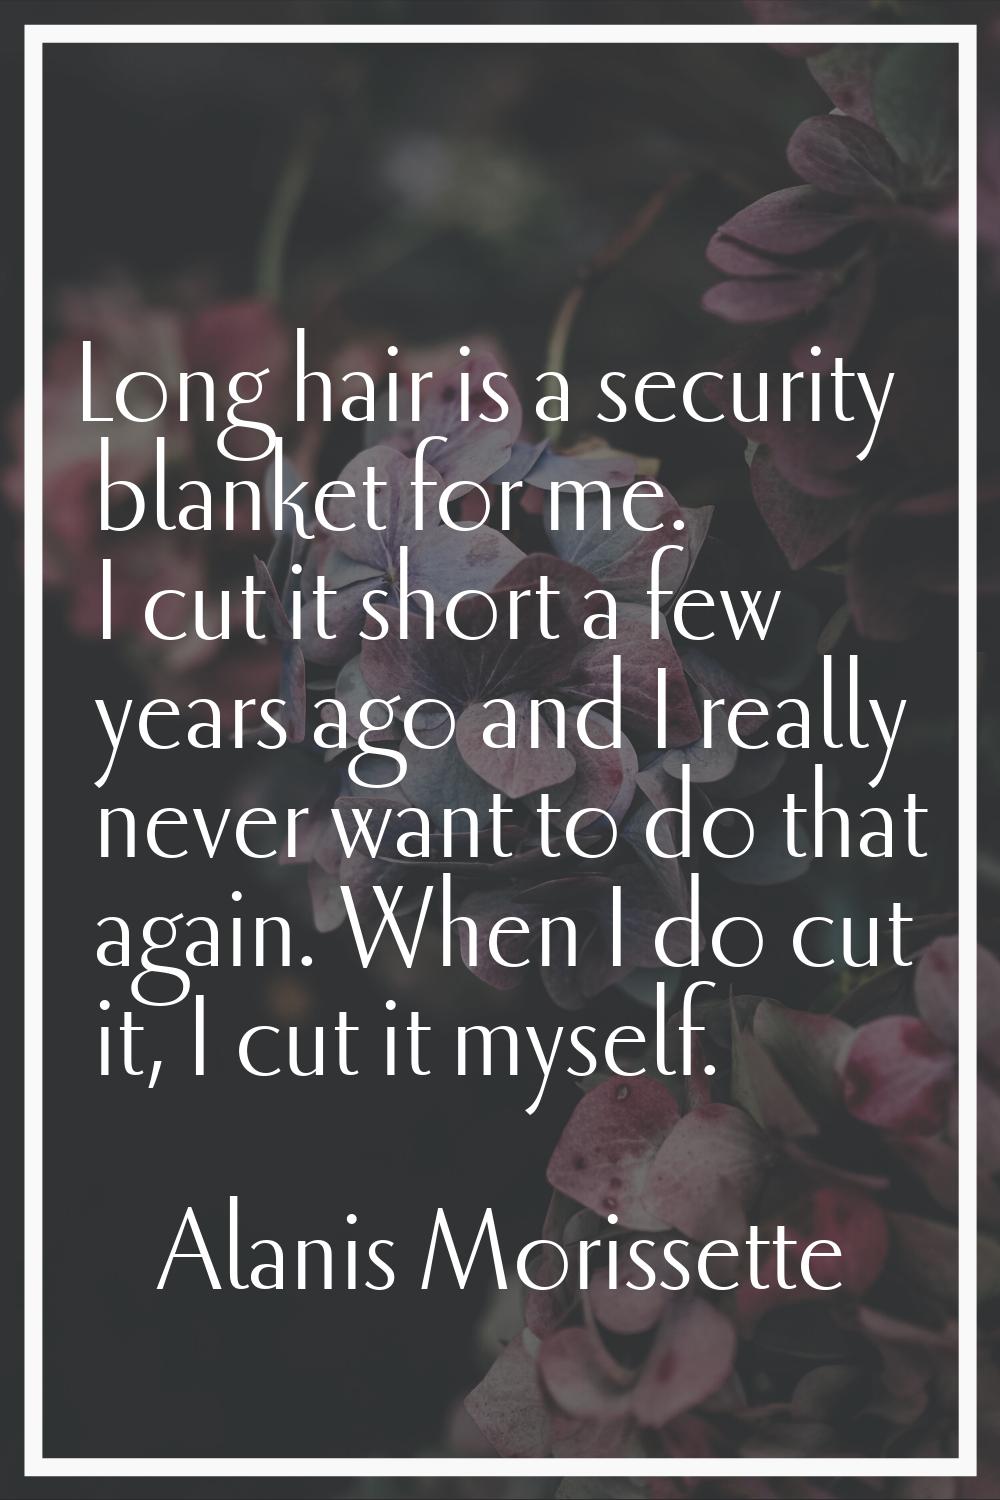 Long hair is a security blanket for me. I cut it short a few years ago and I really never want to d